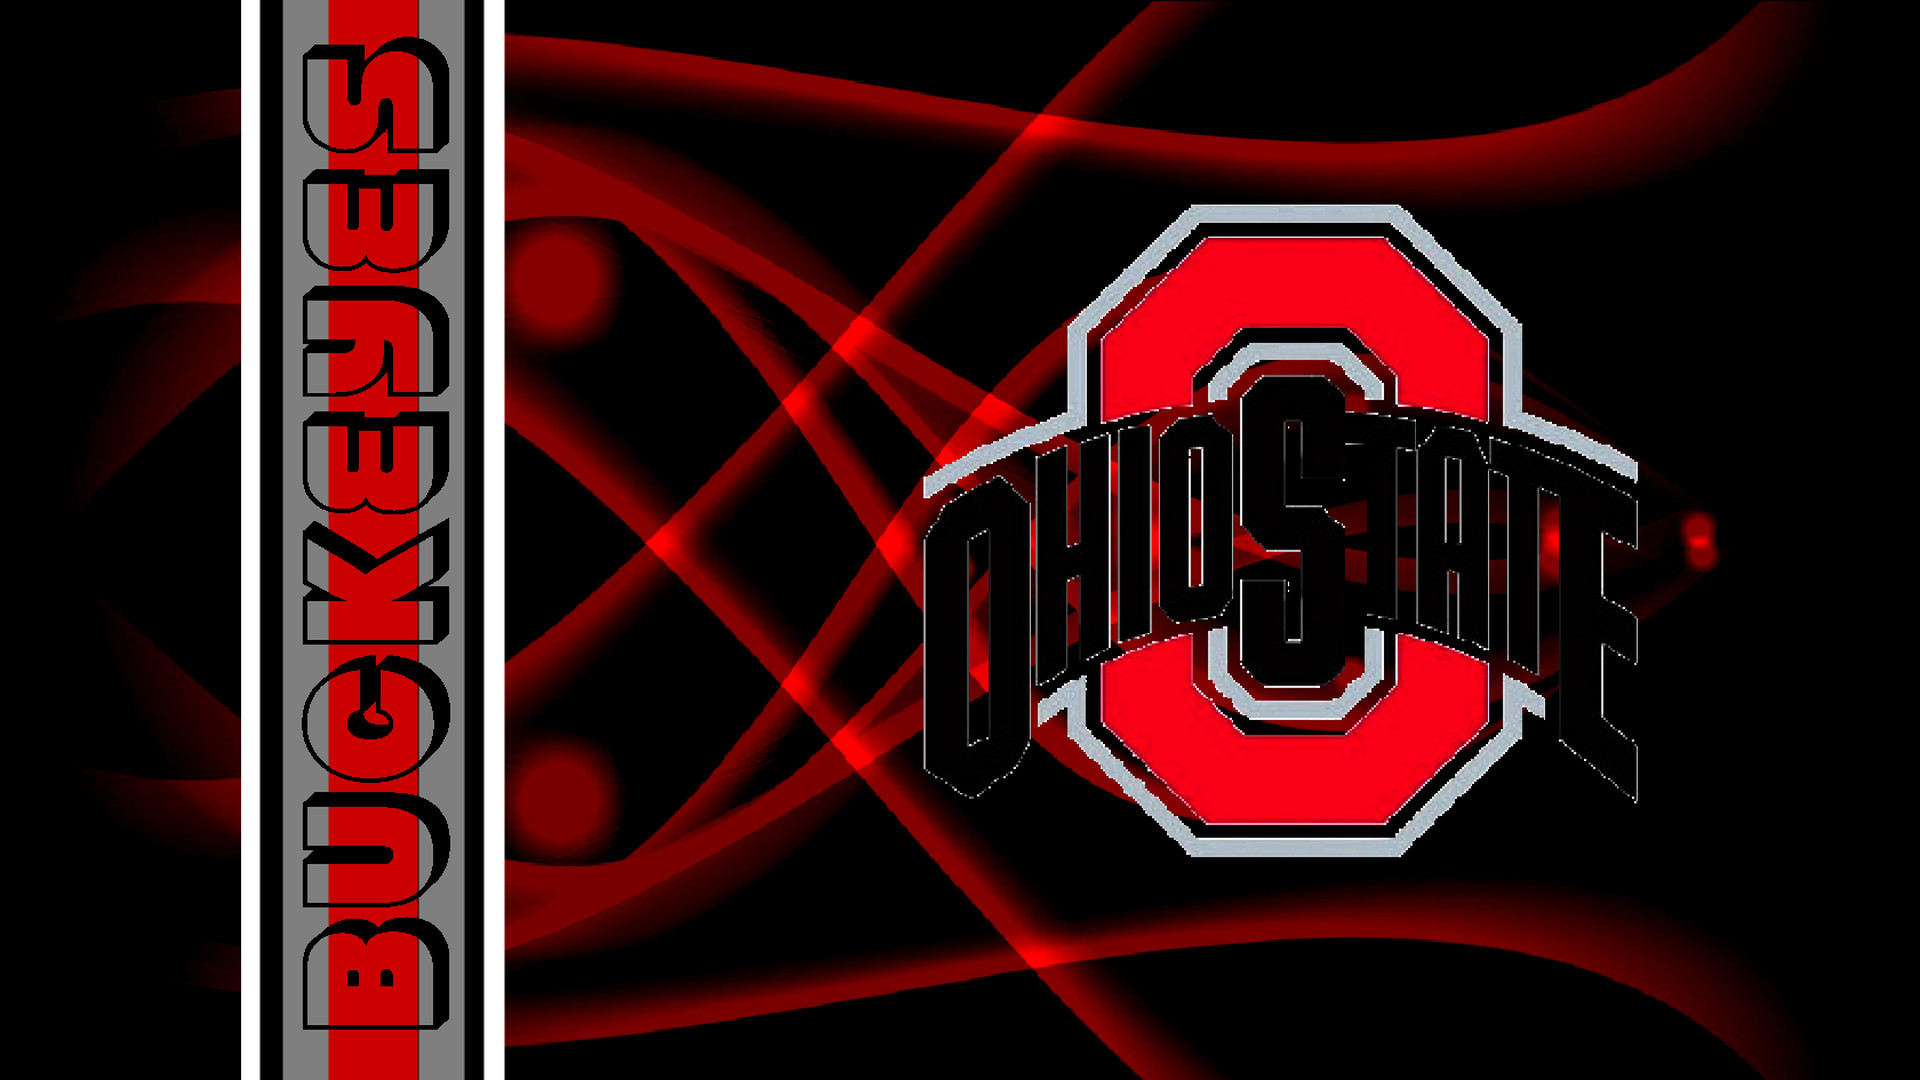 1920x1080 Ohio State Buckeyes images 2013 ATHLETIC LOGO THE OHIO STATE UNIVERSITY HD  wallpaper and background photos